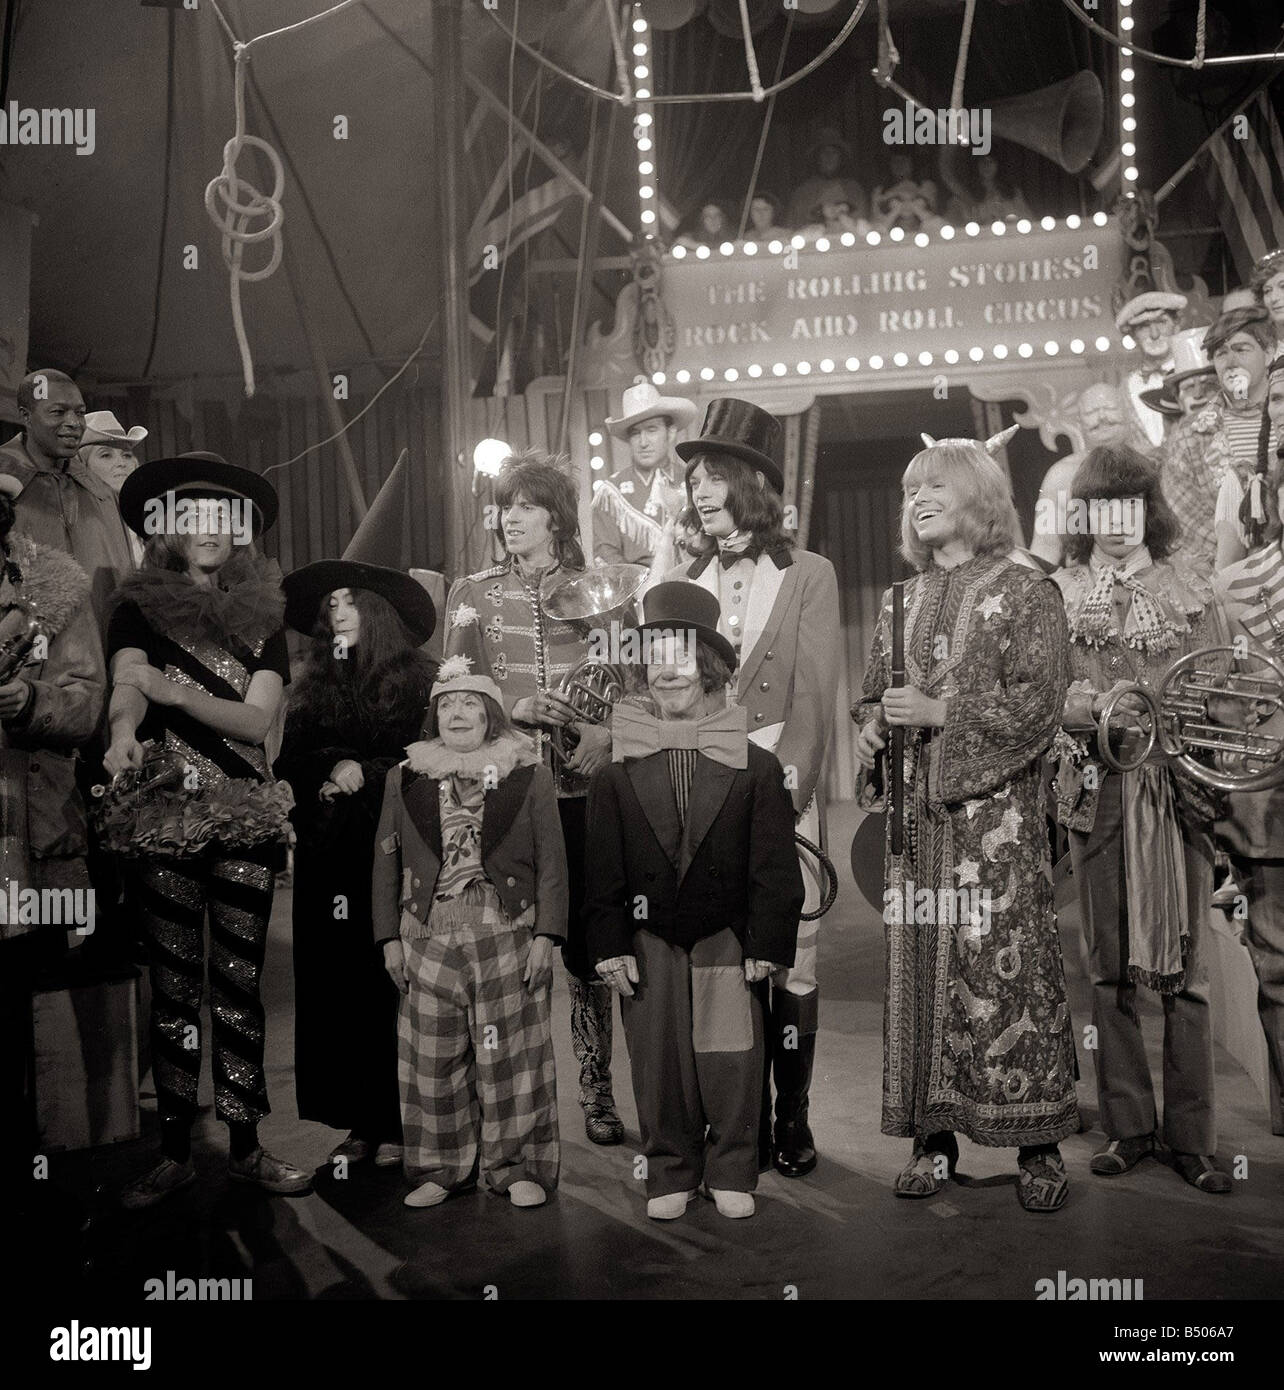 The Rolling Stones December 1968 Pictured after recording their Rock and Roll Circus Show at the Intertel Studios in Wembley London specially recorded for screening over Christmas Mick Jagger Dressed as Ringmaster John Lennon Yoko Ono Keith Richards Charlie Watts Brian Jones Bill Wyman Entertainment Music Studio Groups Circus Performers 1960s Stock Photo